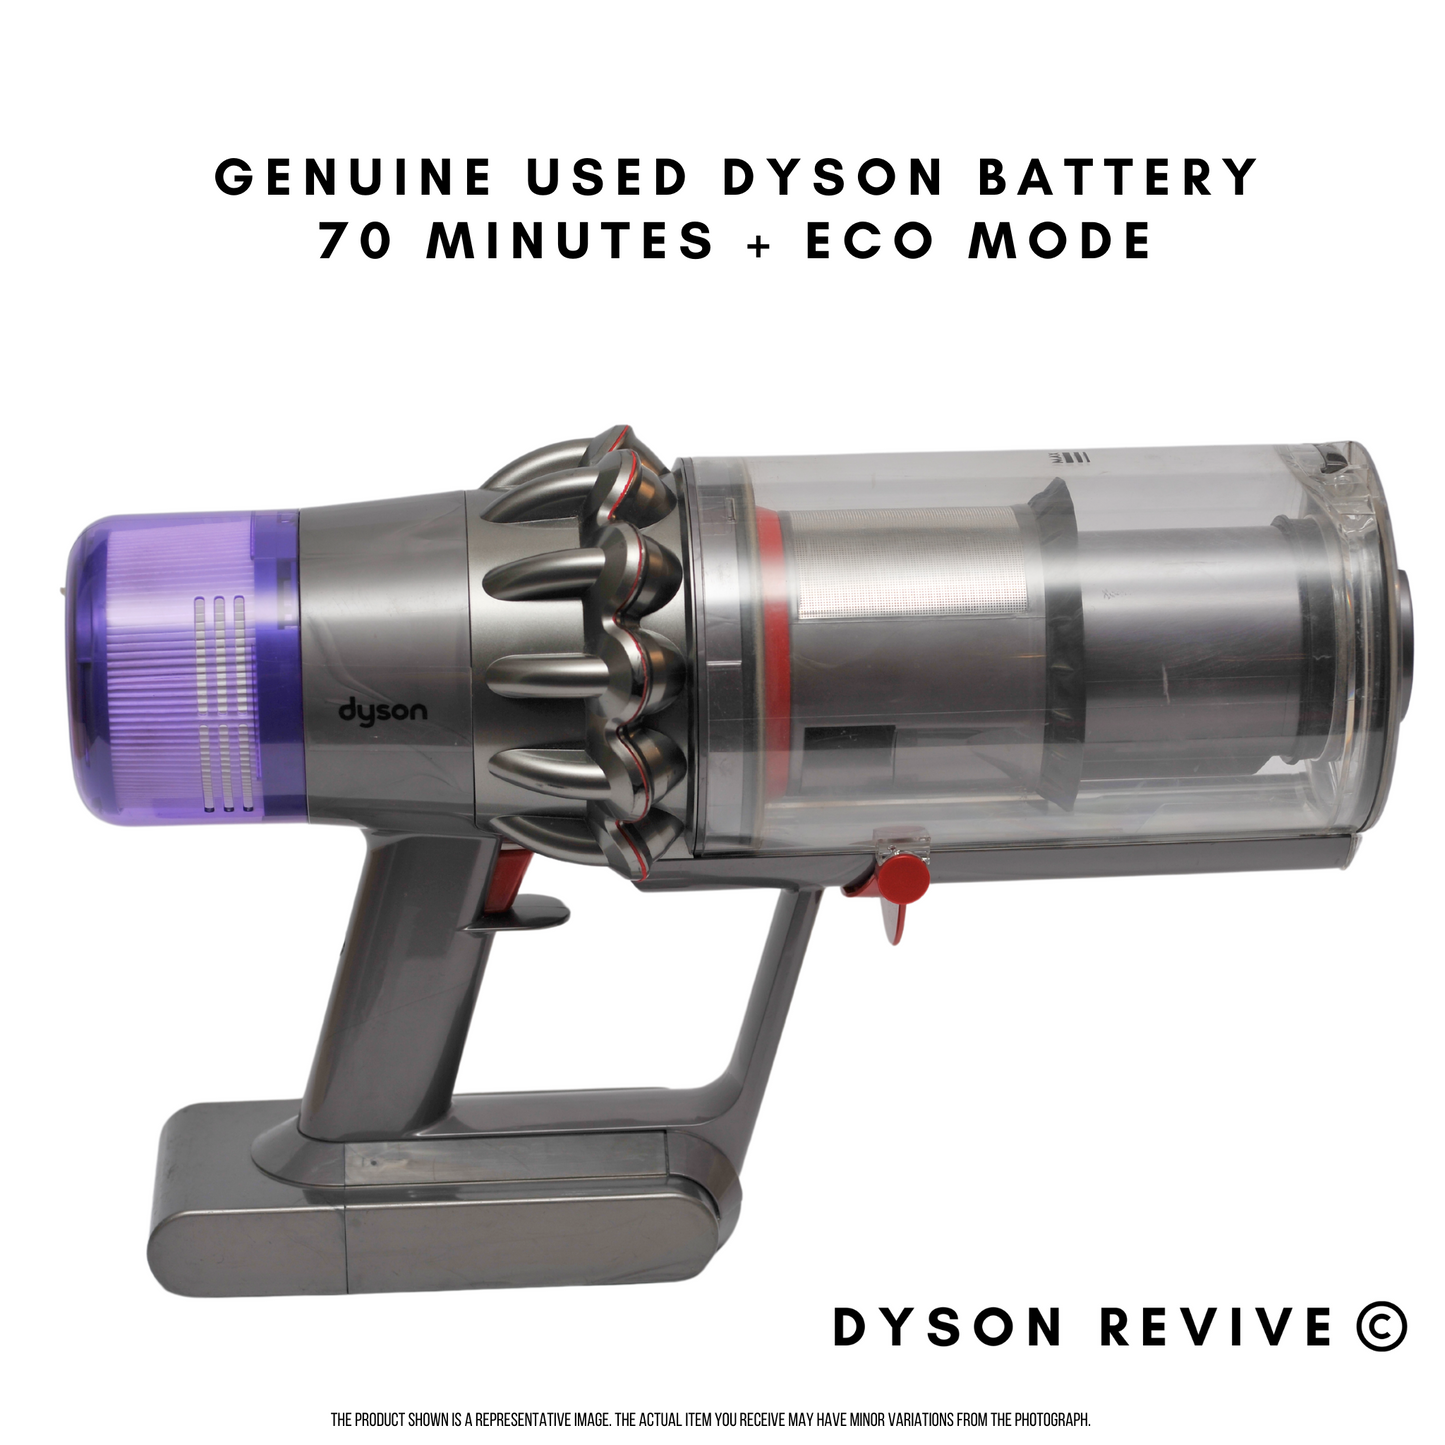 Genuine Dyson Refurbished V11 Main Body With Used Genuine Dyson Battery Vacuum Cleaner - Dyson Revive